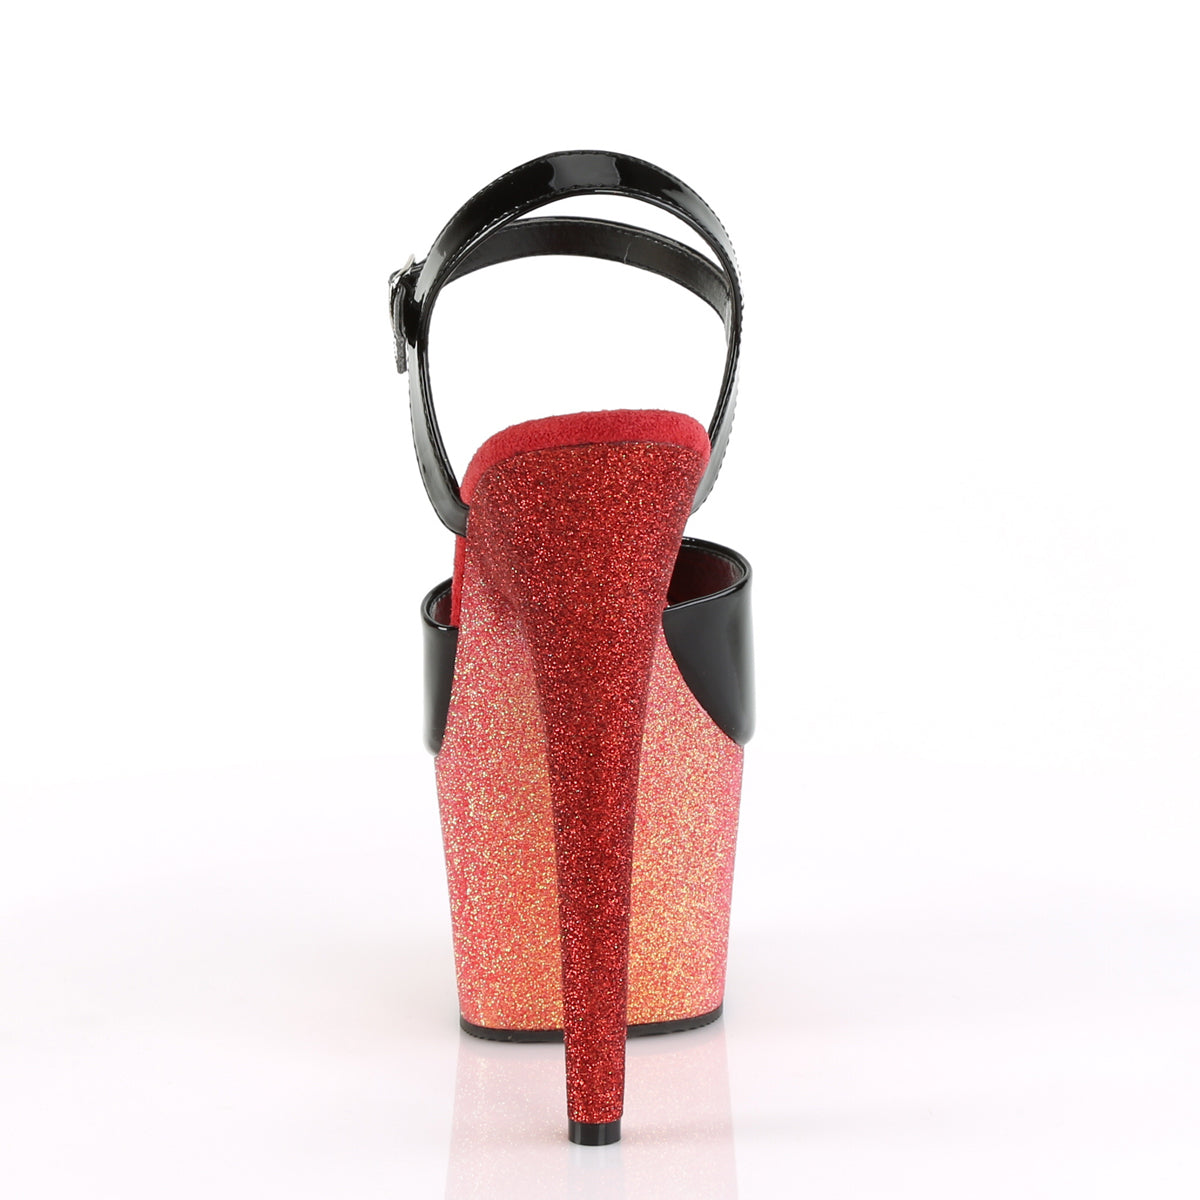 Pleaser Sandalias para mujer ADORE-709ombre Blk / Rose Gold-Red Ombre